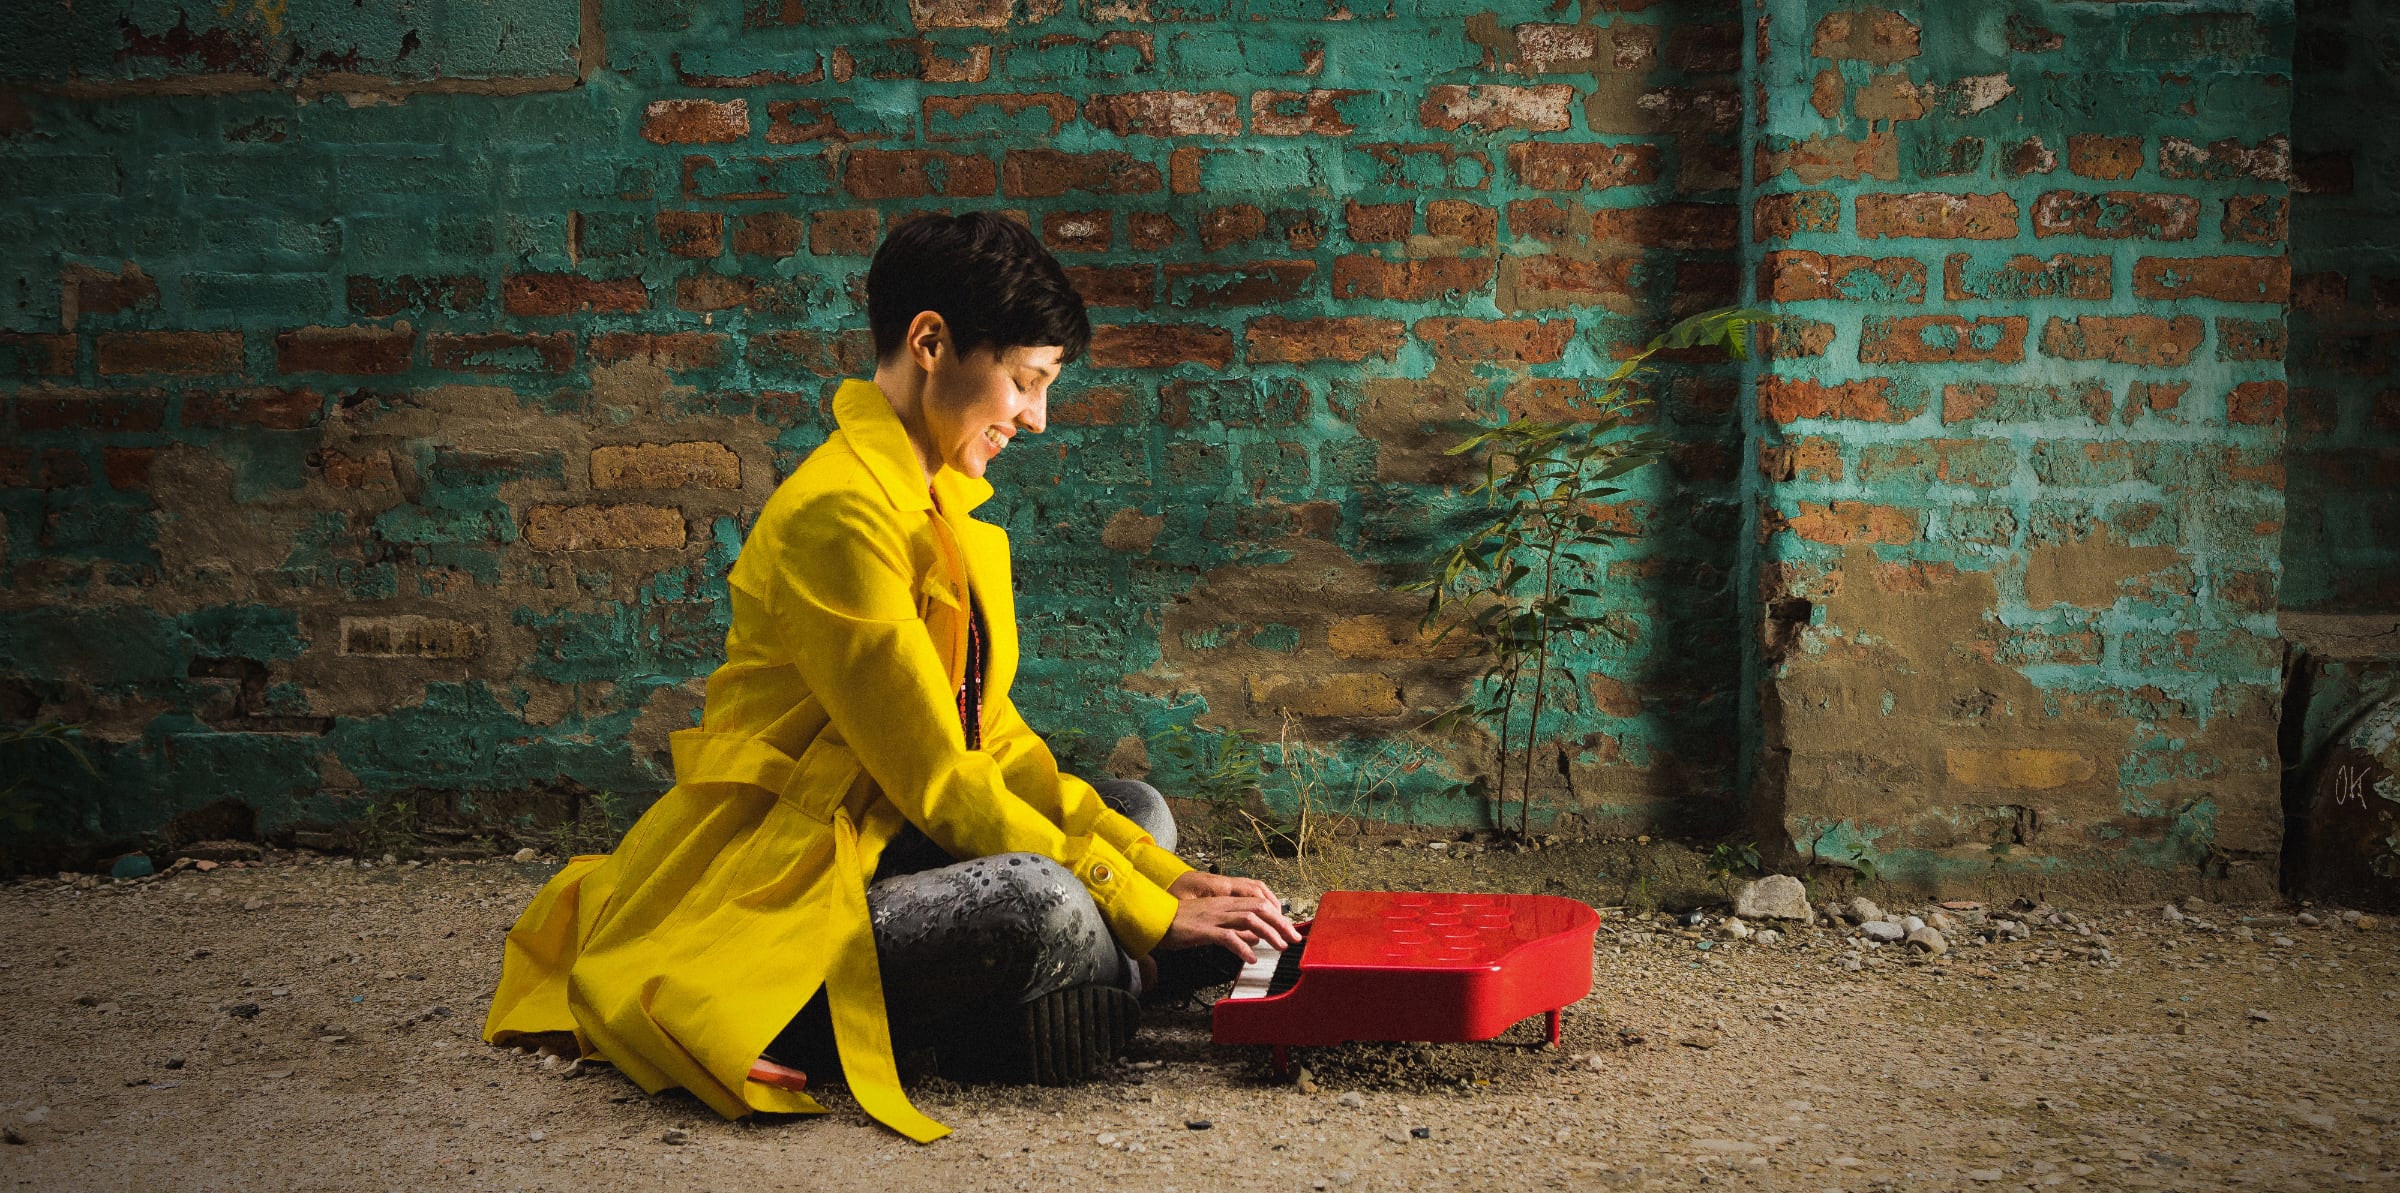 Diana Lawrence wearing a yellow coat, sitting at a red toy piano